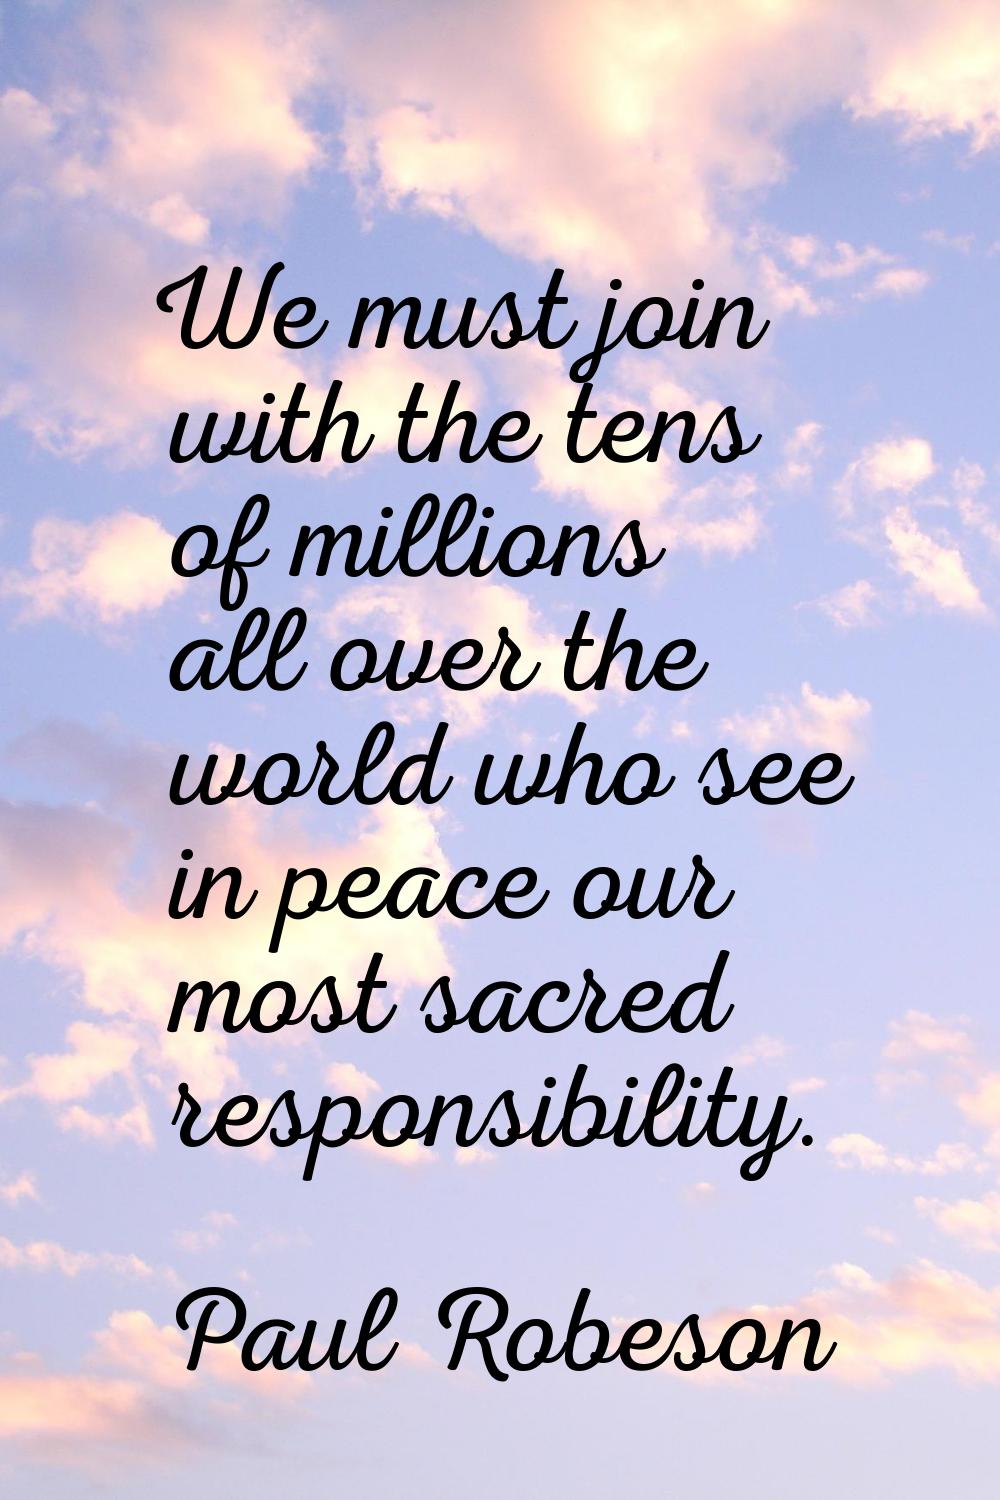 We must join with the tens of millions all over the world who see in peace our most sacred responsi